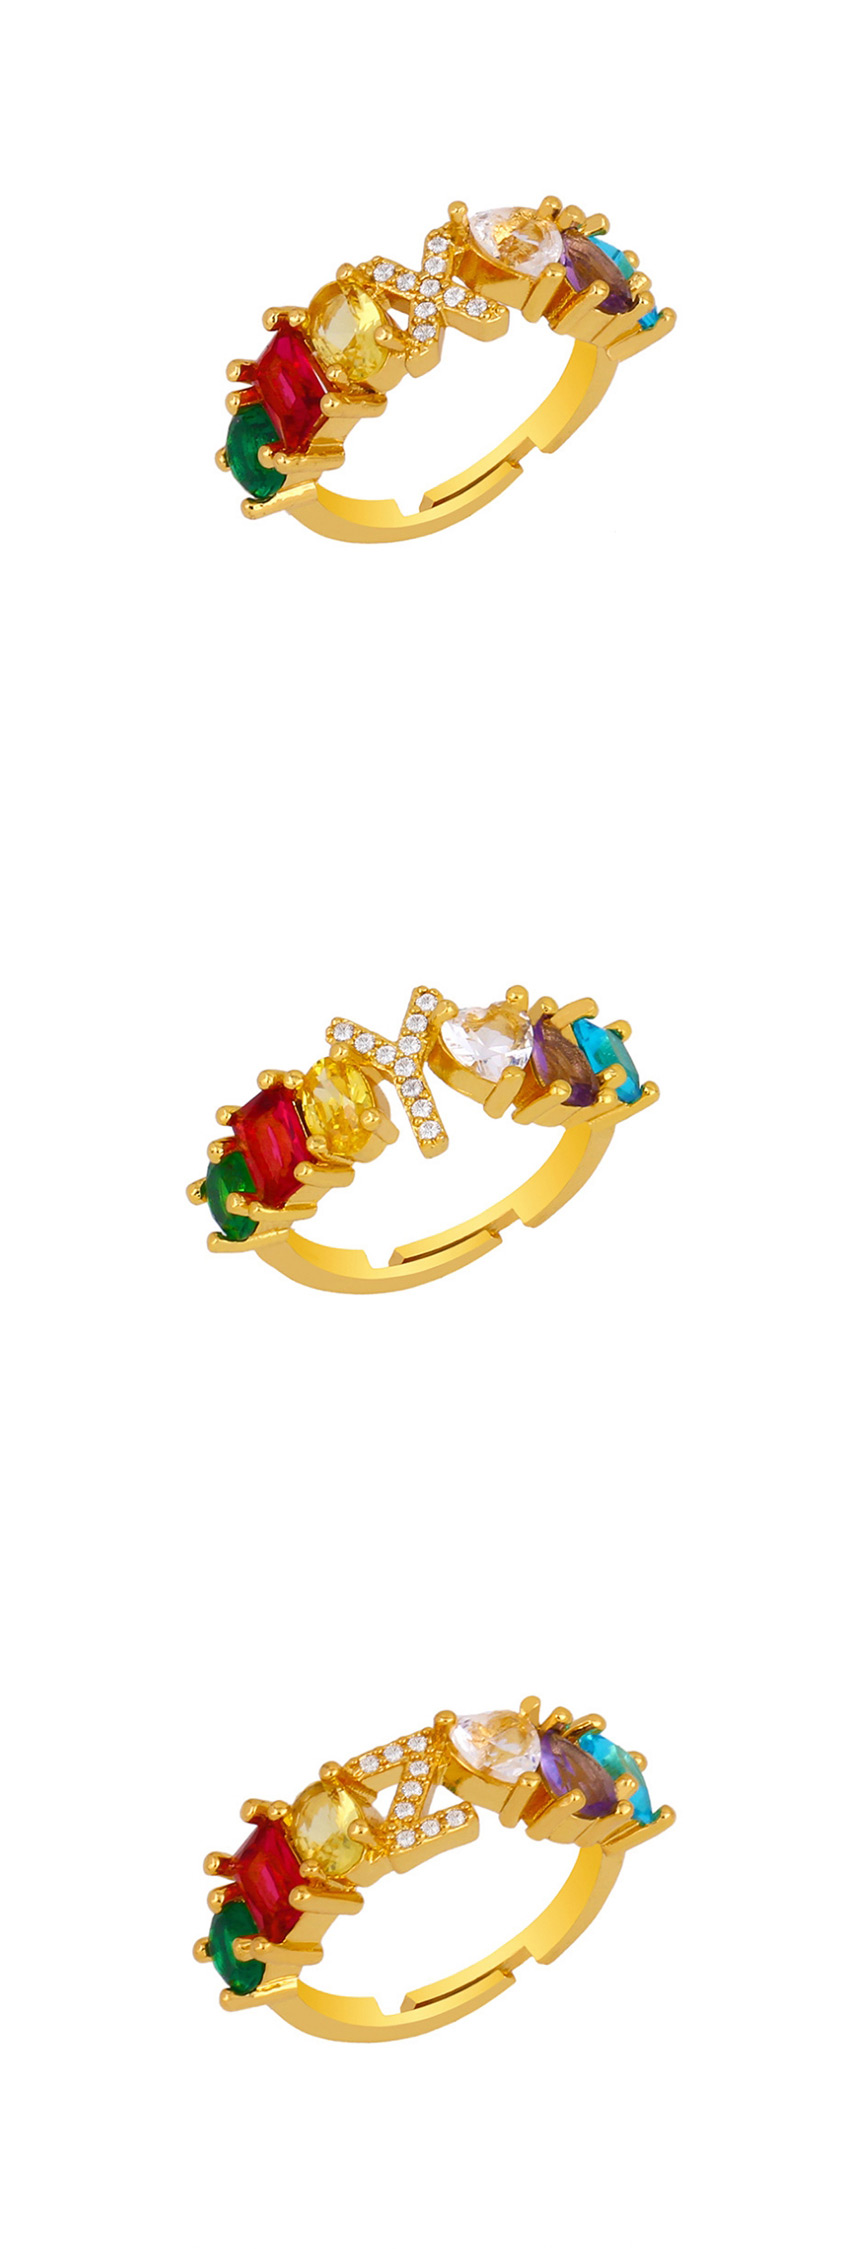 Fashion J Gold Heart-shaped Adjustable Ring With Colorful Diamond Letters,Rings